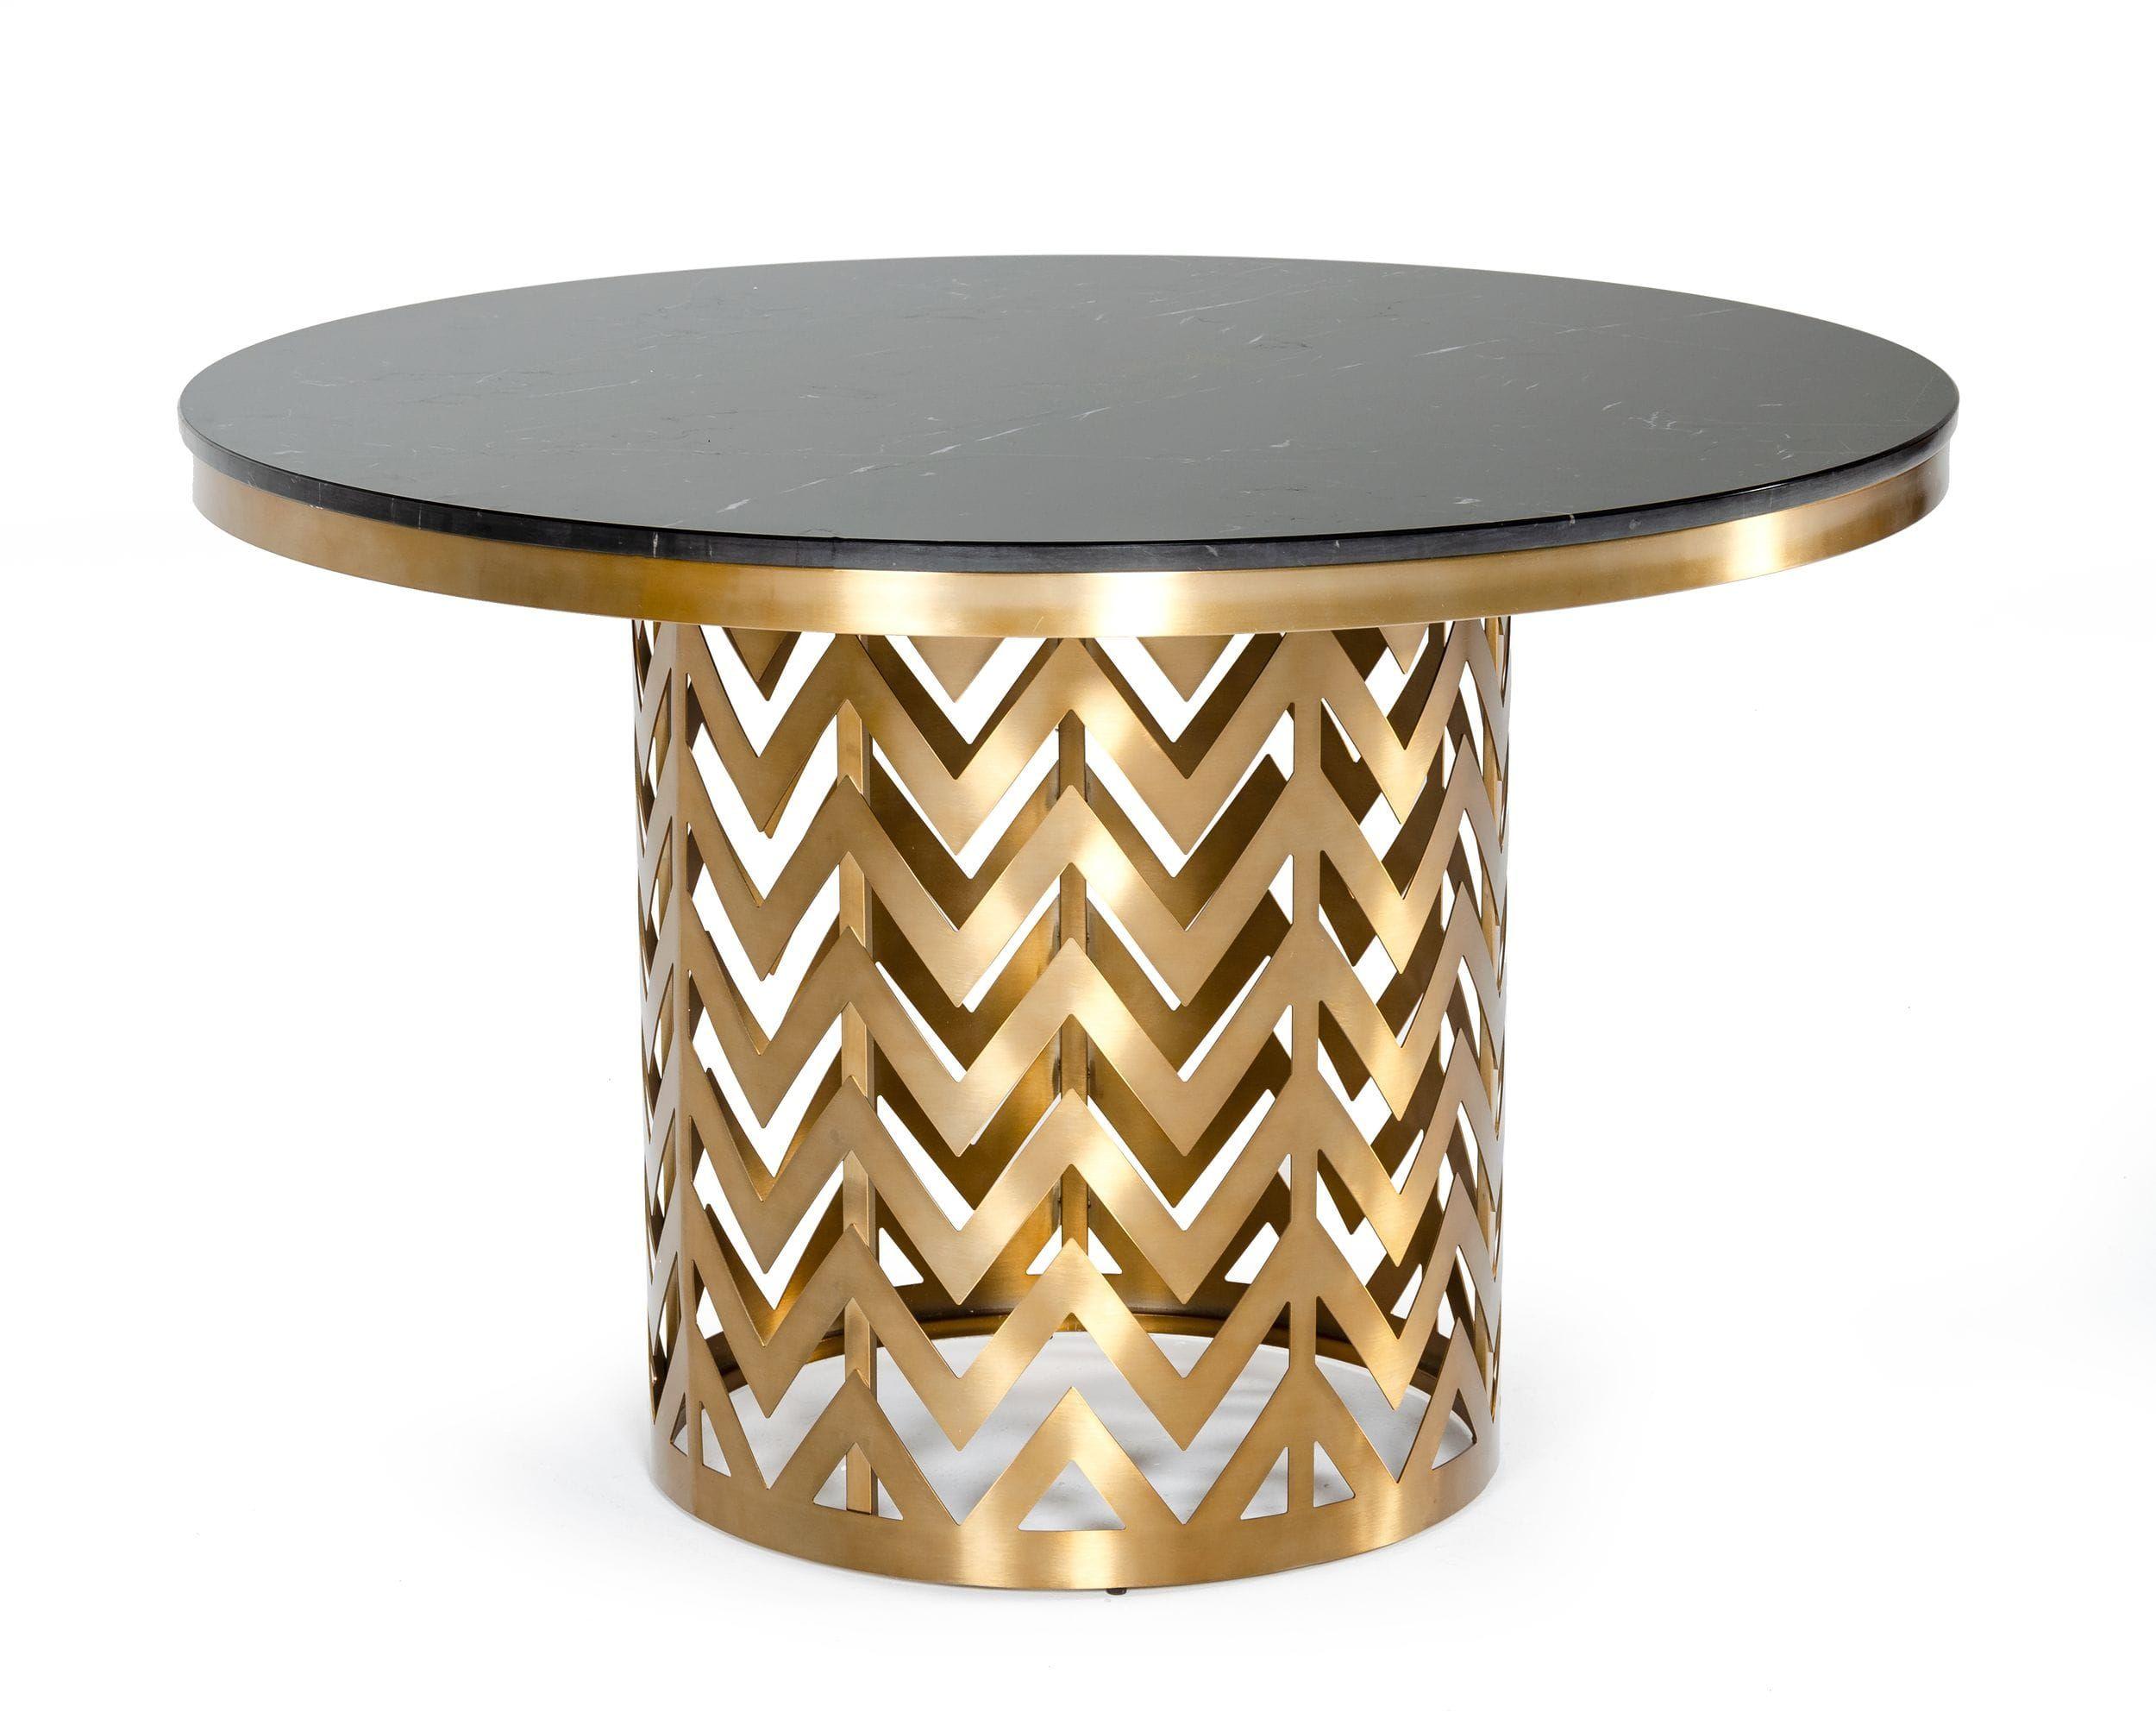 Contemporary, Modern Dining Table Kowal VGGMM-DT-1426 in Gold 